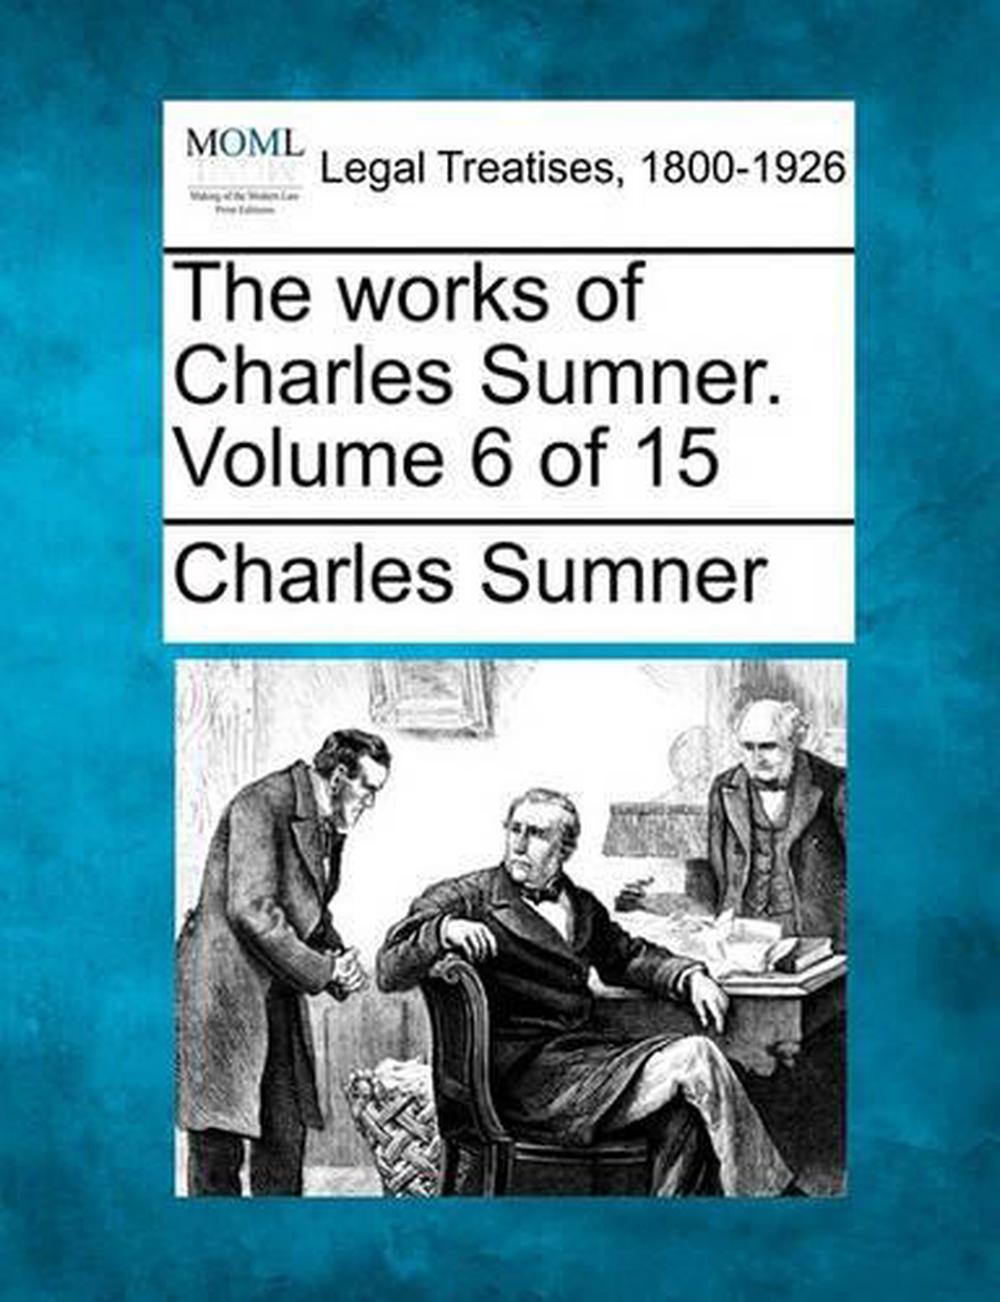 Charles Sumner and the Rights of Man by David Herbert Donald